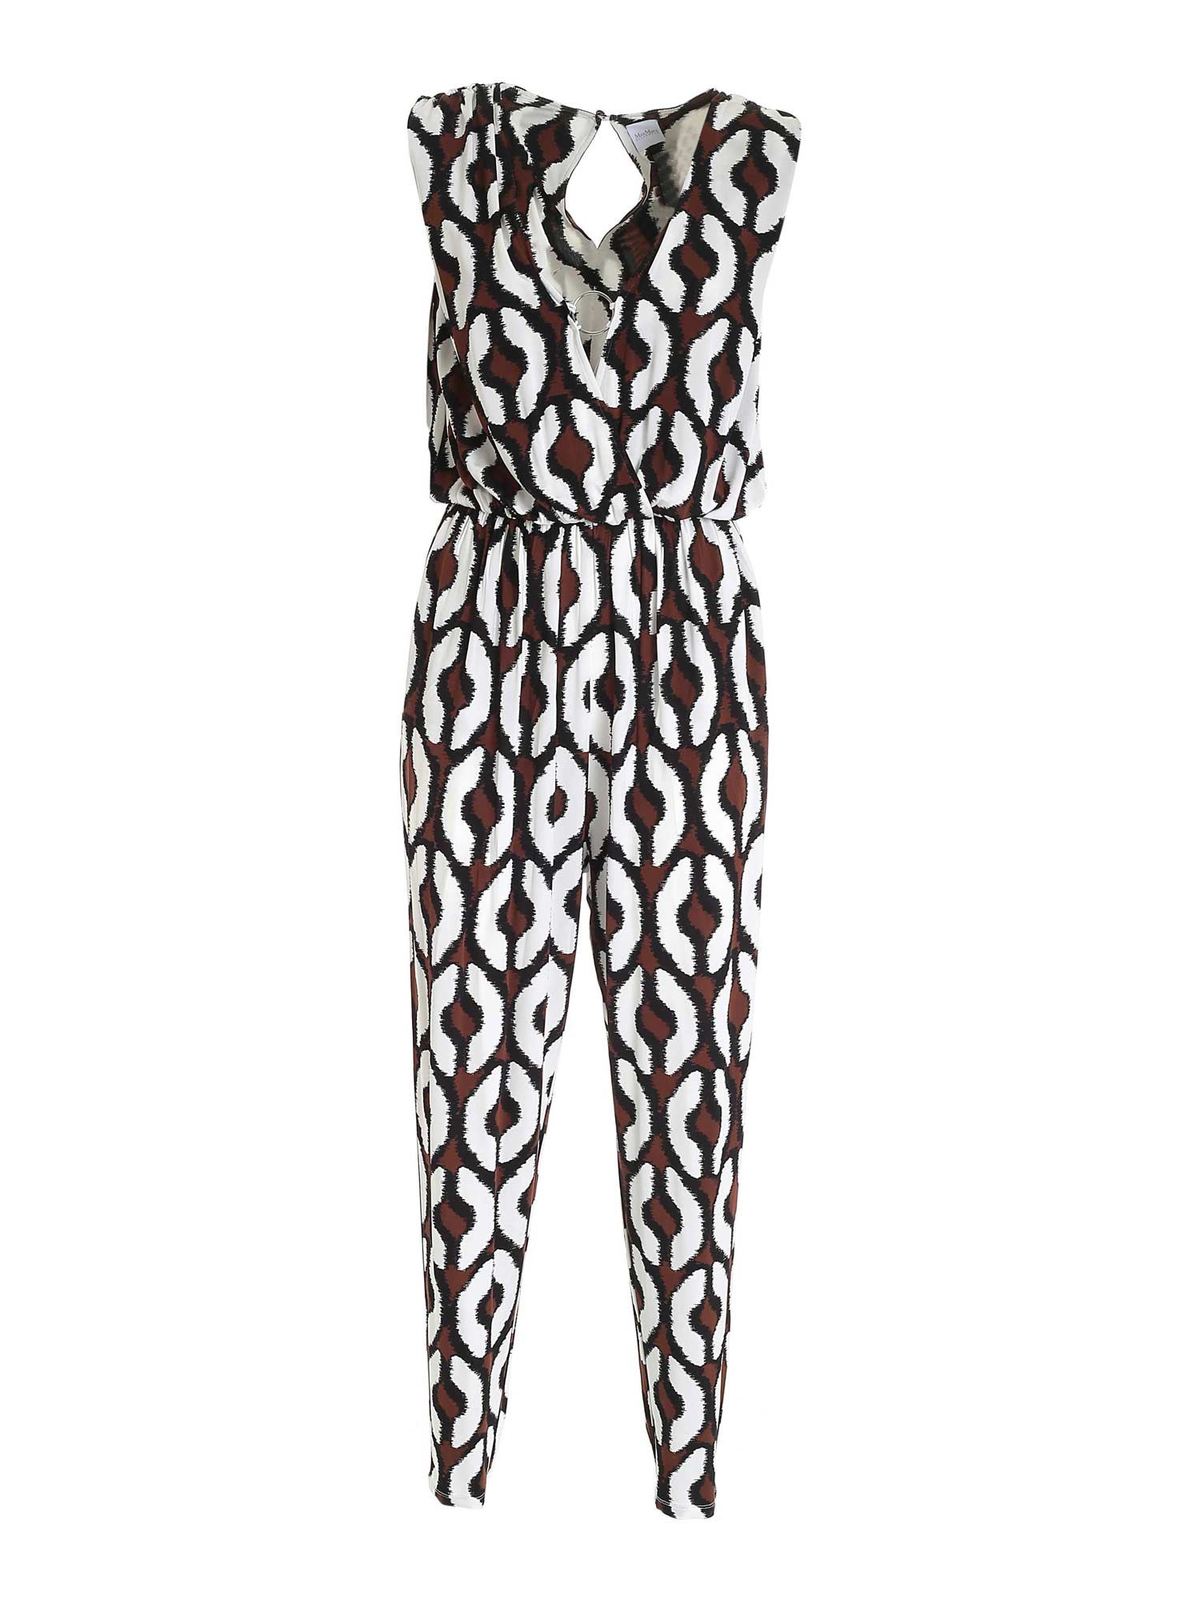 MAX MARA TENNIS JUMPSUIT IN WHITE BLACK AND BROWN